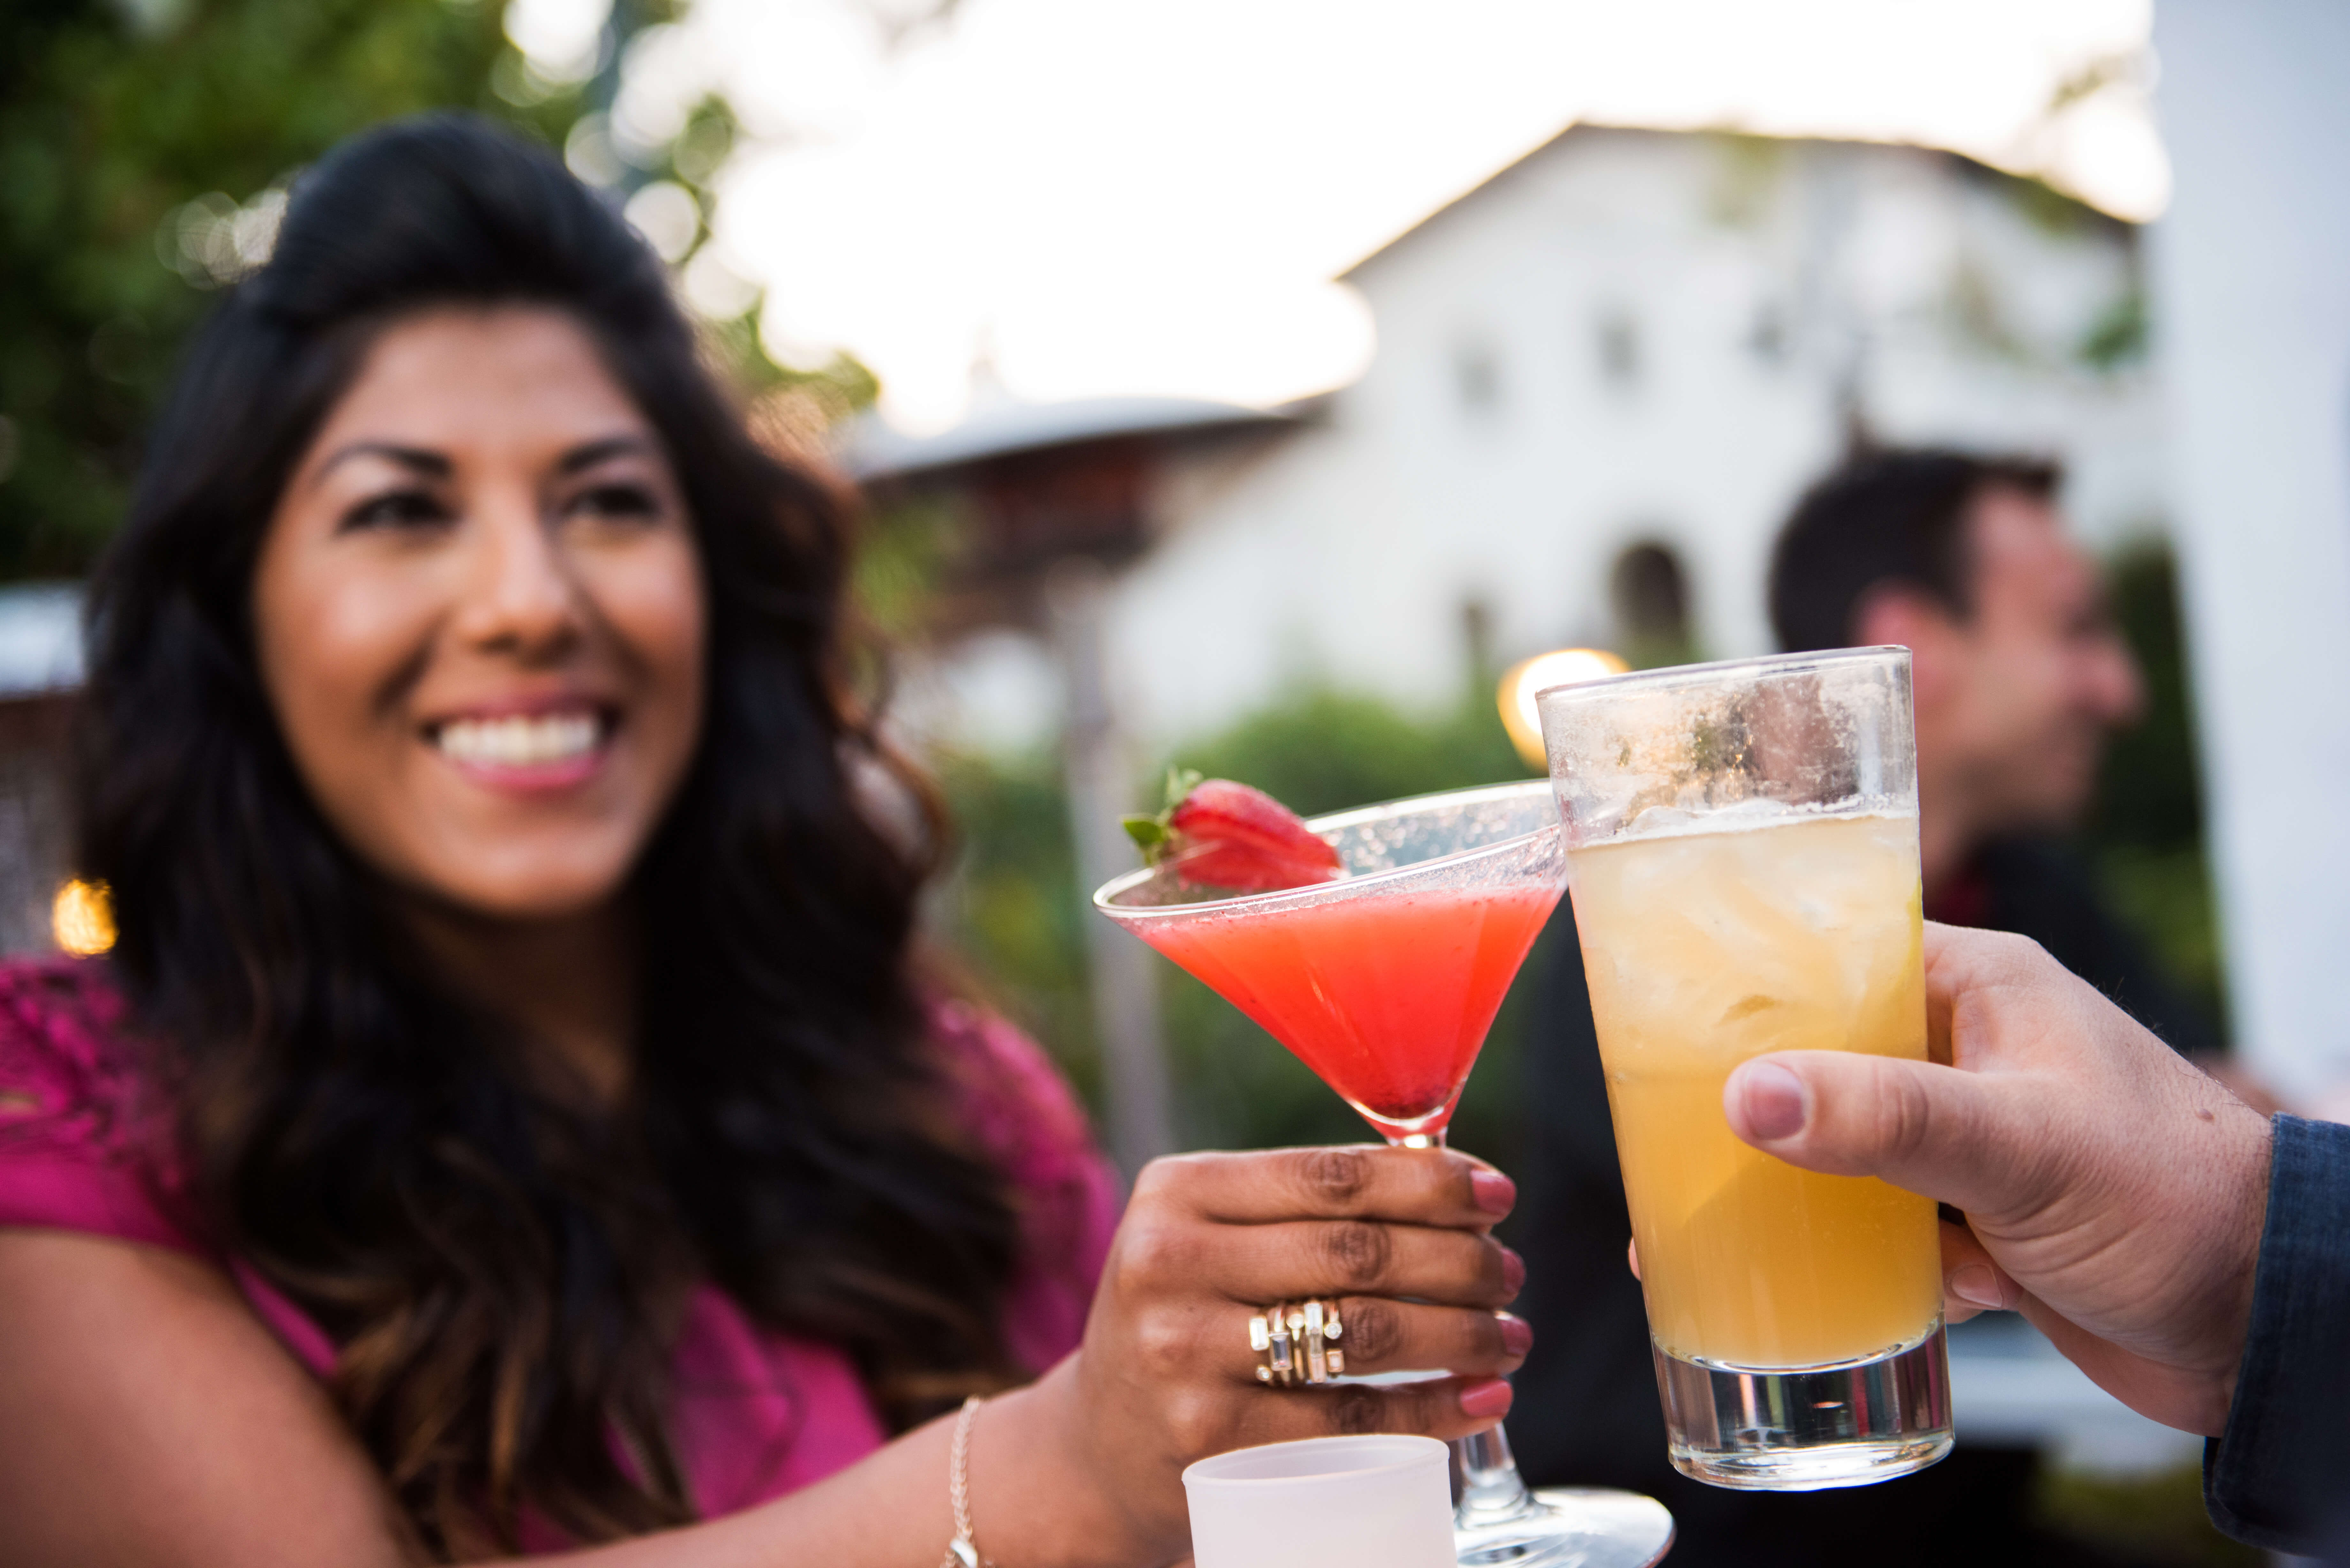 A toast at the Luna Red Patio by the San Luis Obispo Mission